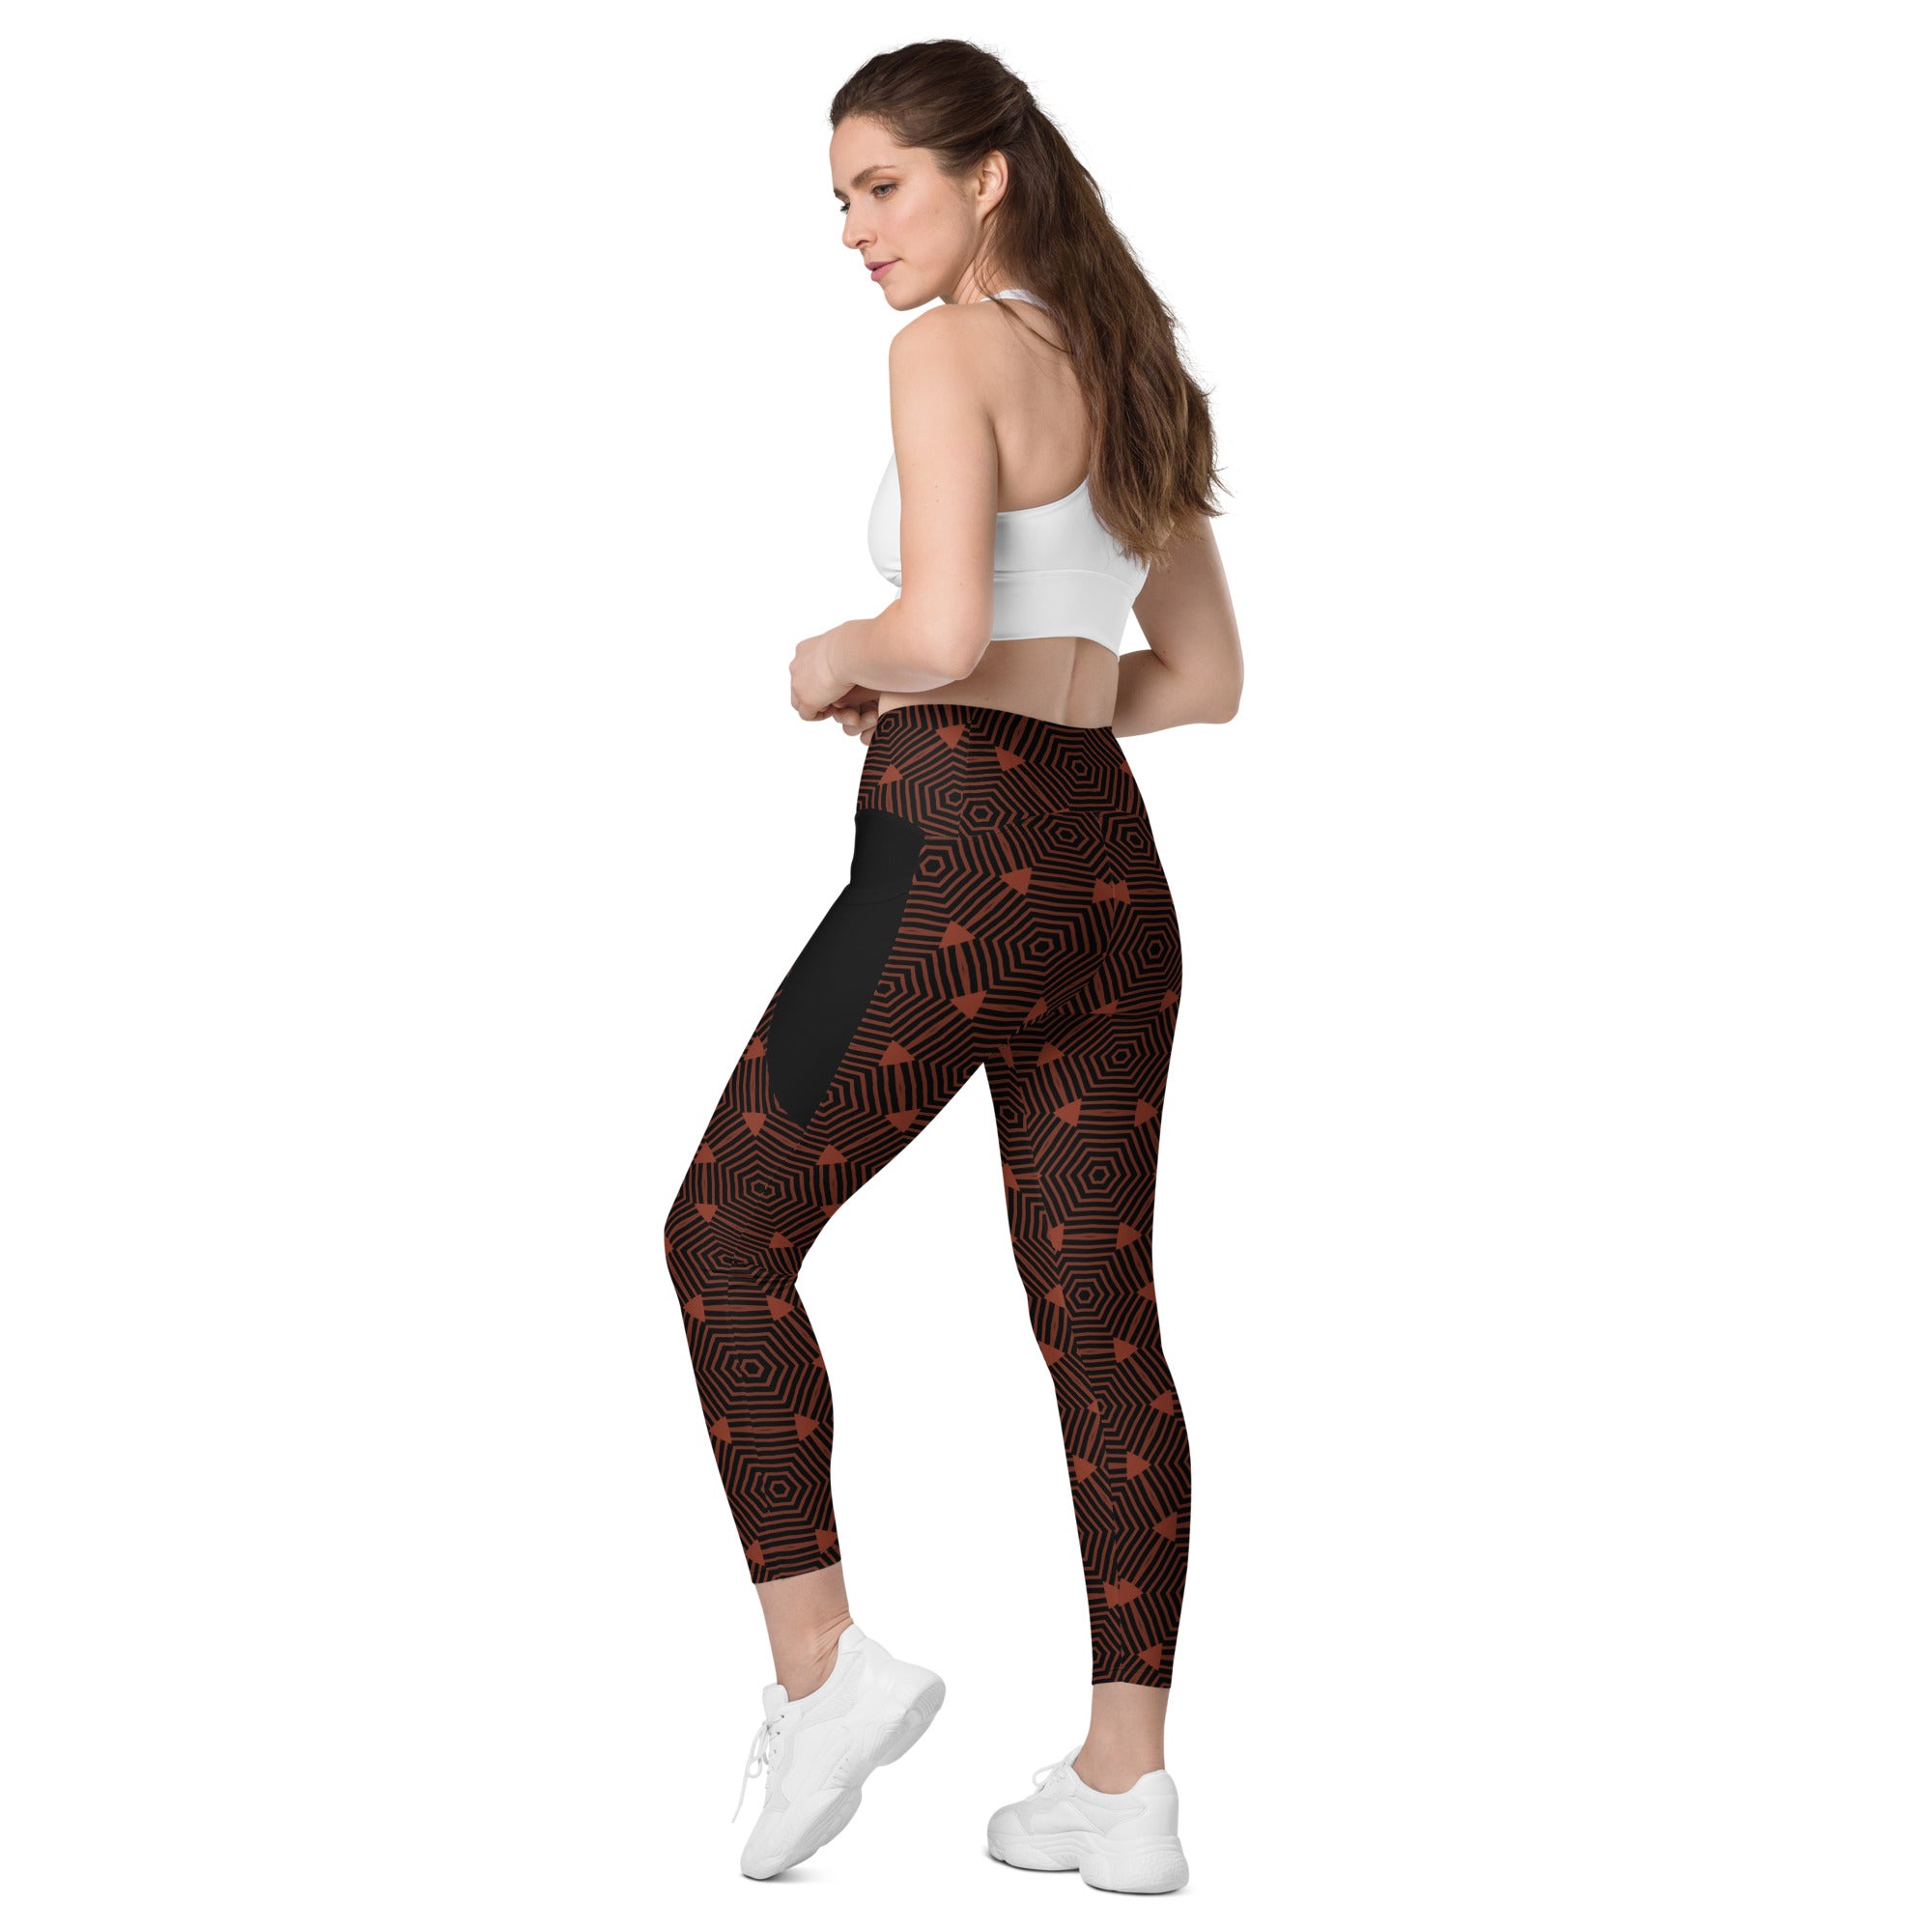 Back view of Checkered Charm Crossover Leggings highlighting rear pocket